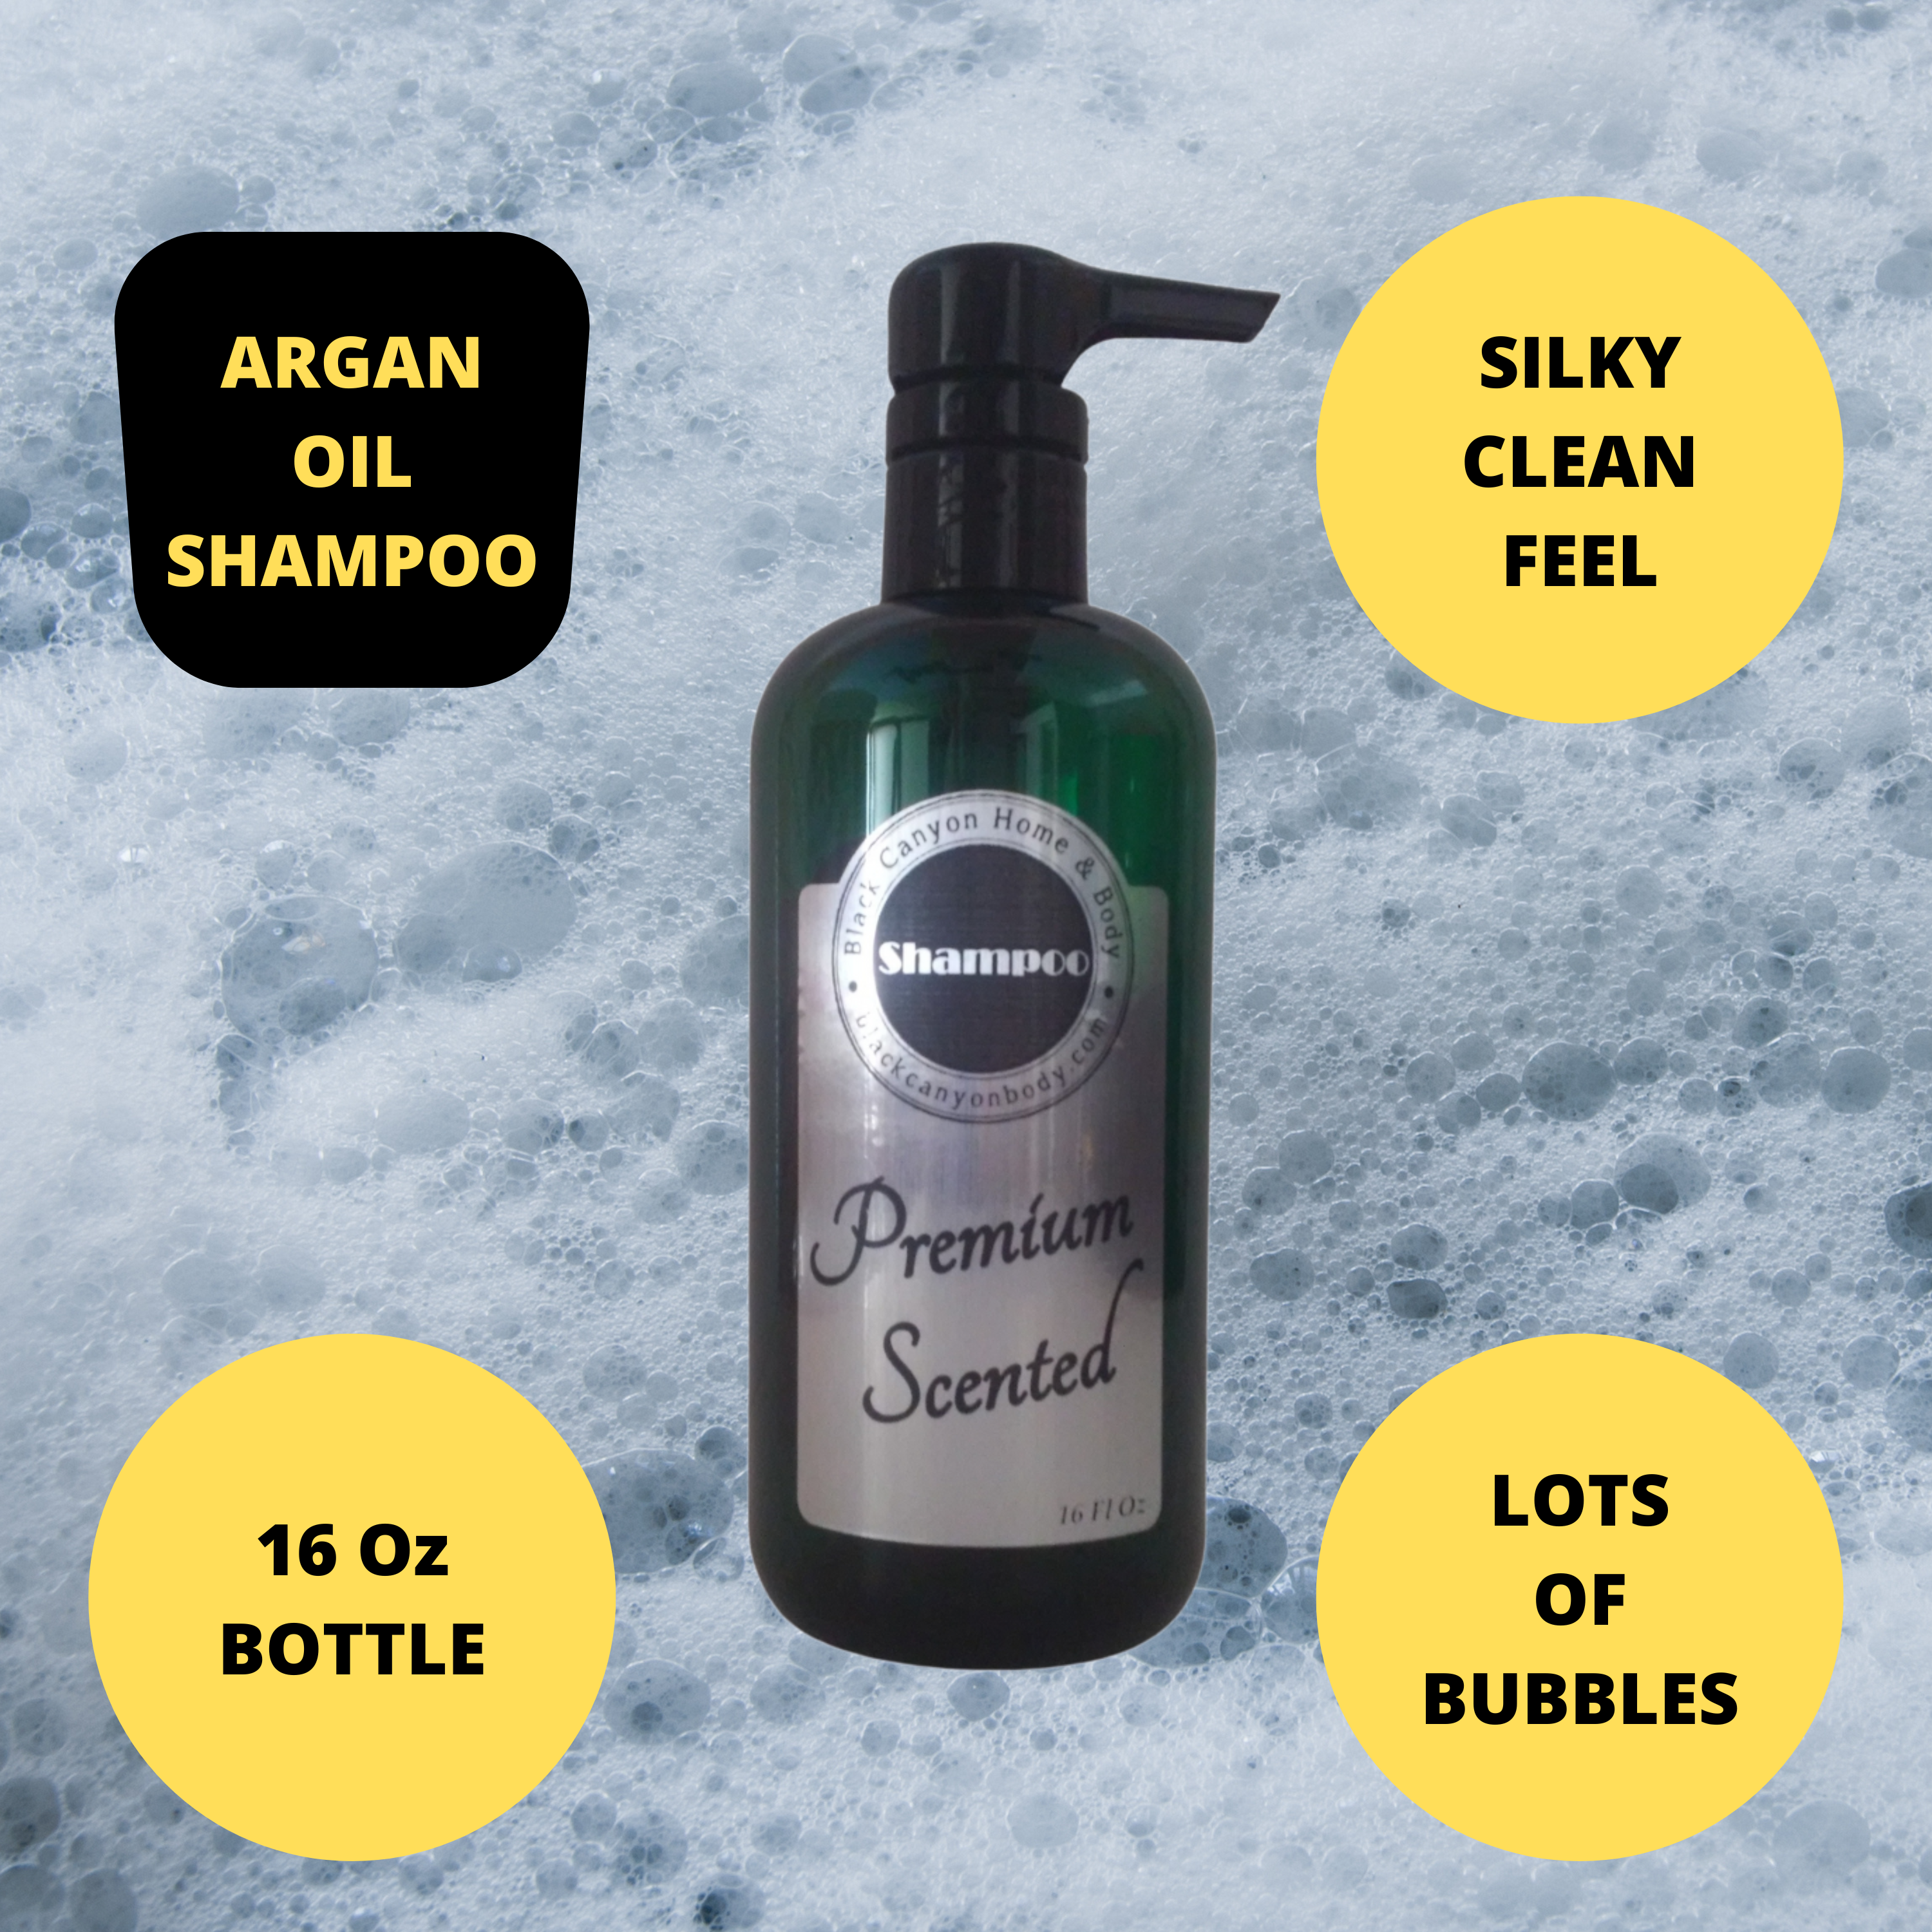 Black Canyon Fortune Cookie Scented Shampoo with Argan Oil